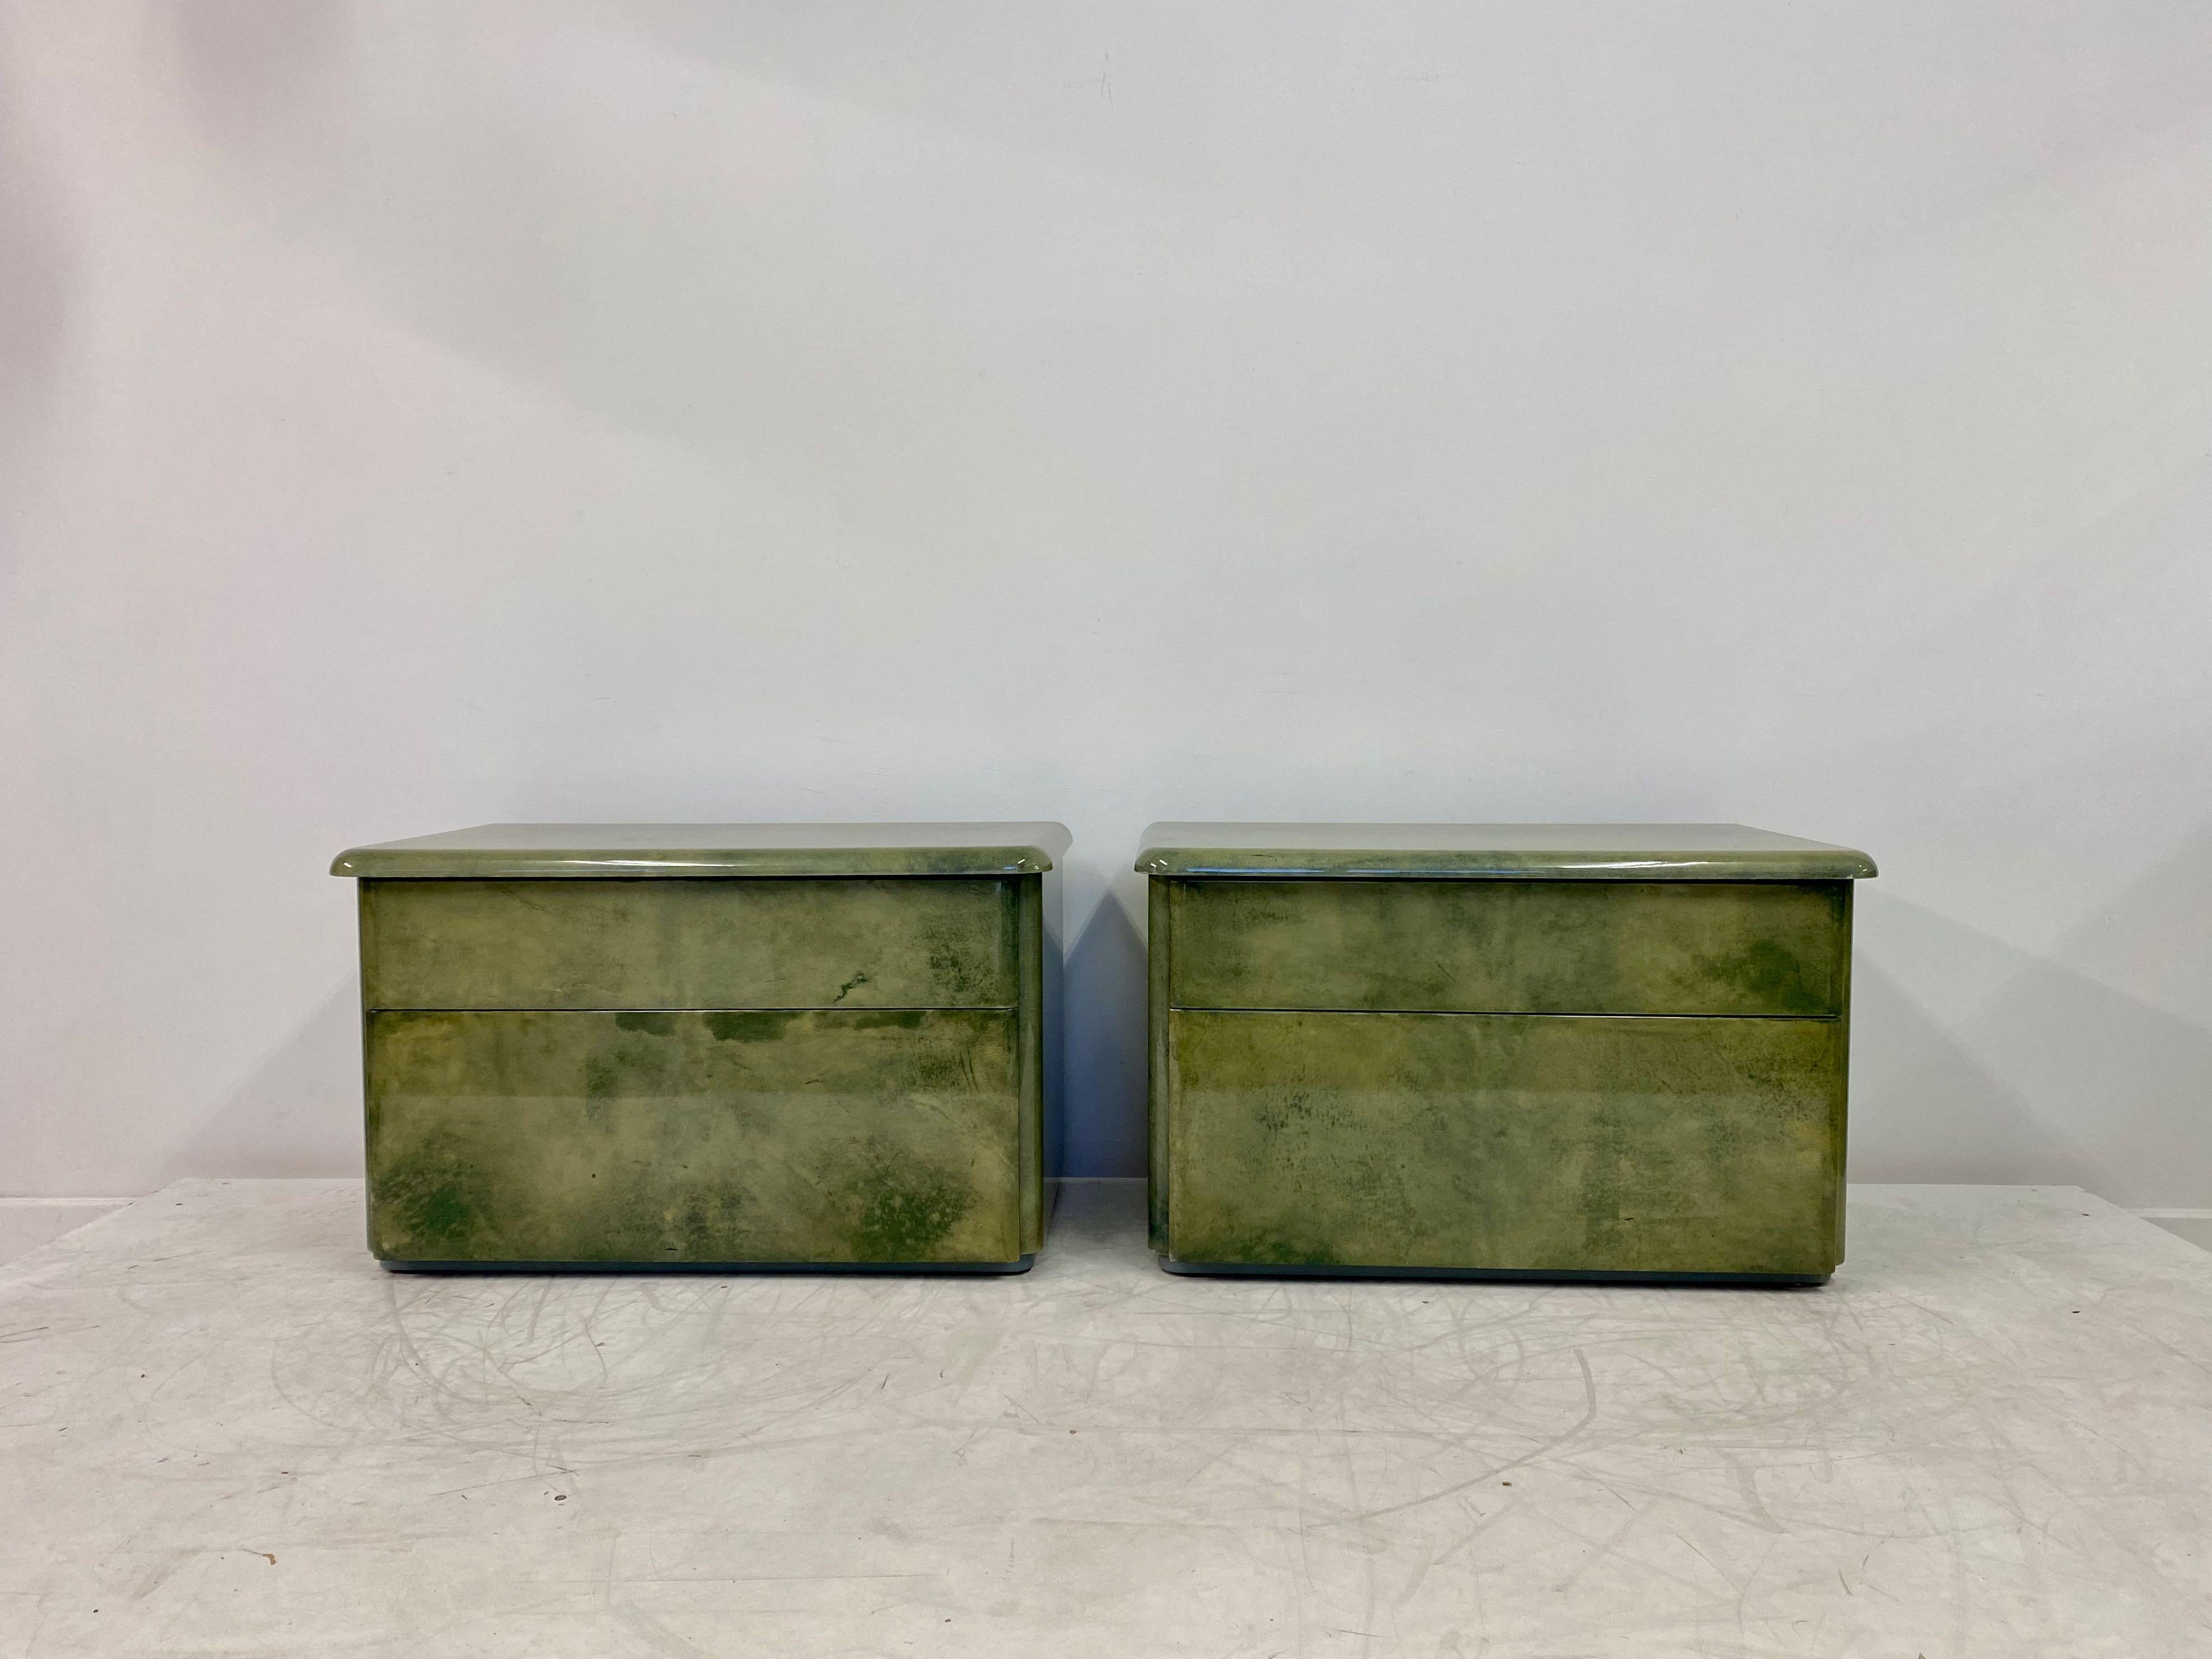 Pair of bedside tables

Lacquered parchment

Two drawers with one inner drawer

1970s-1980s, Italian.